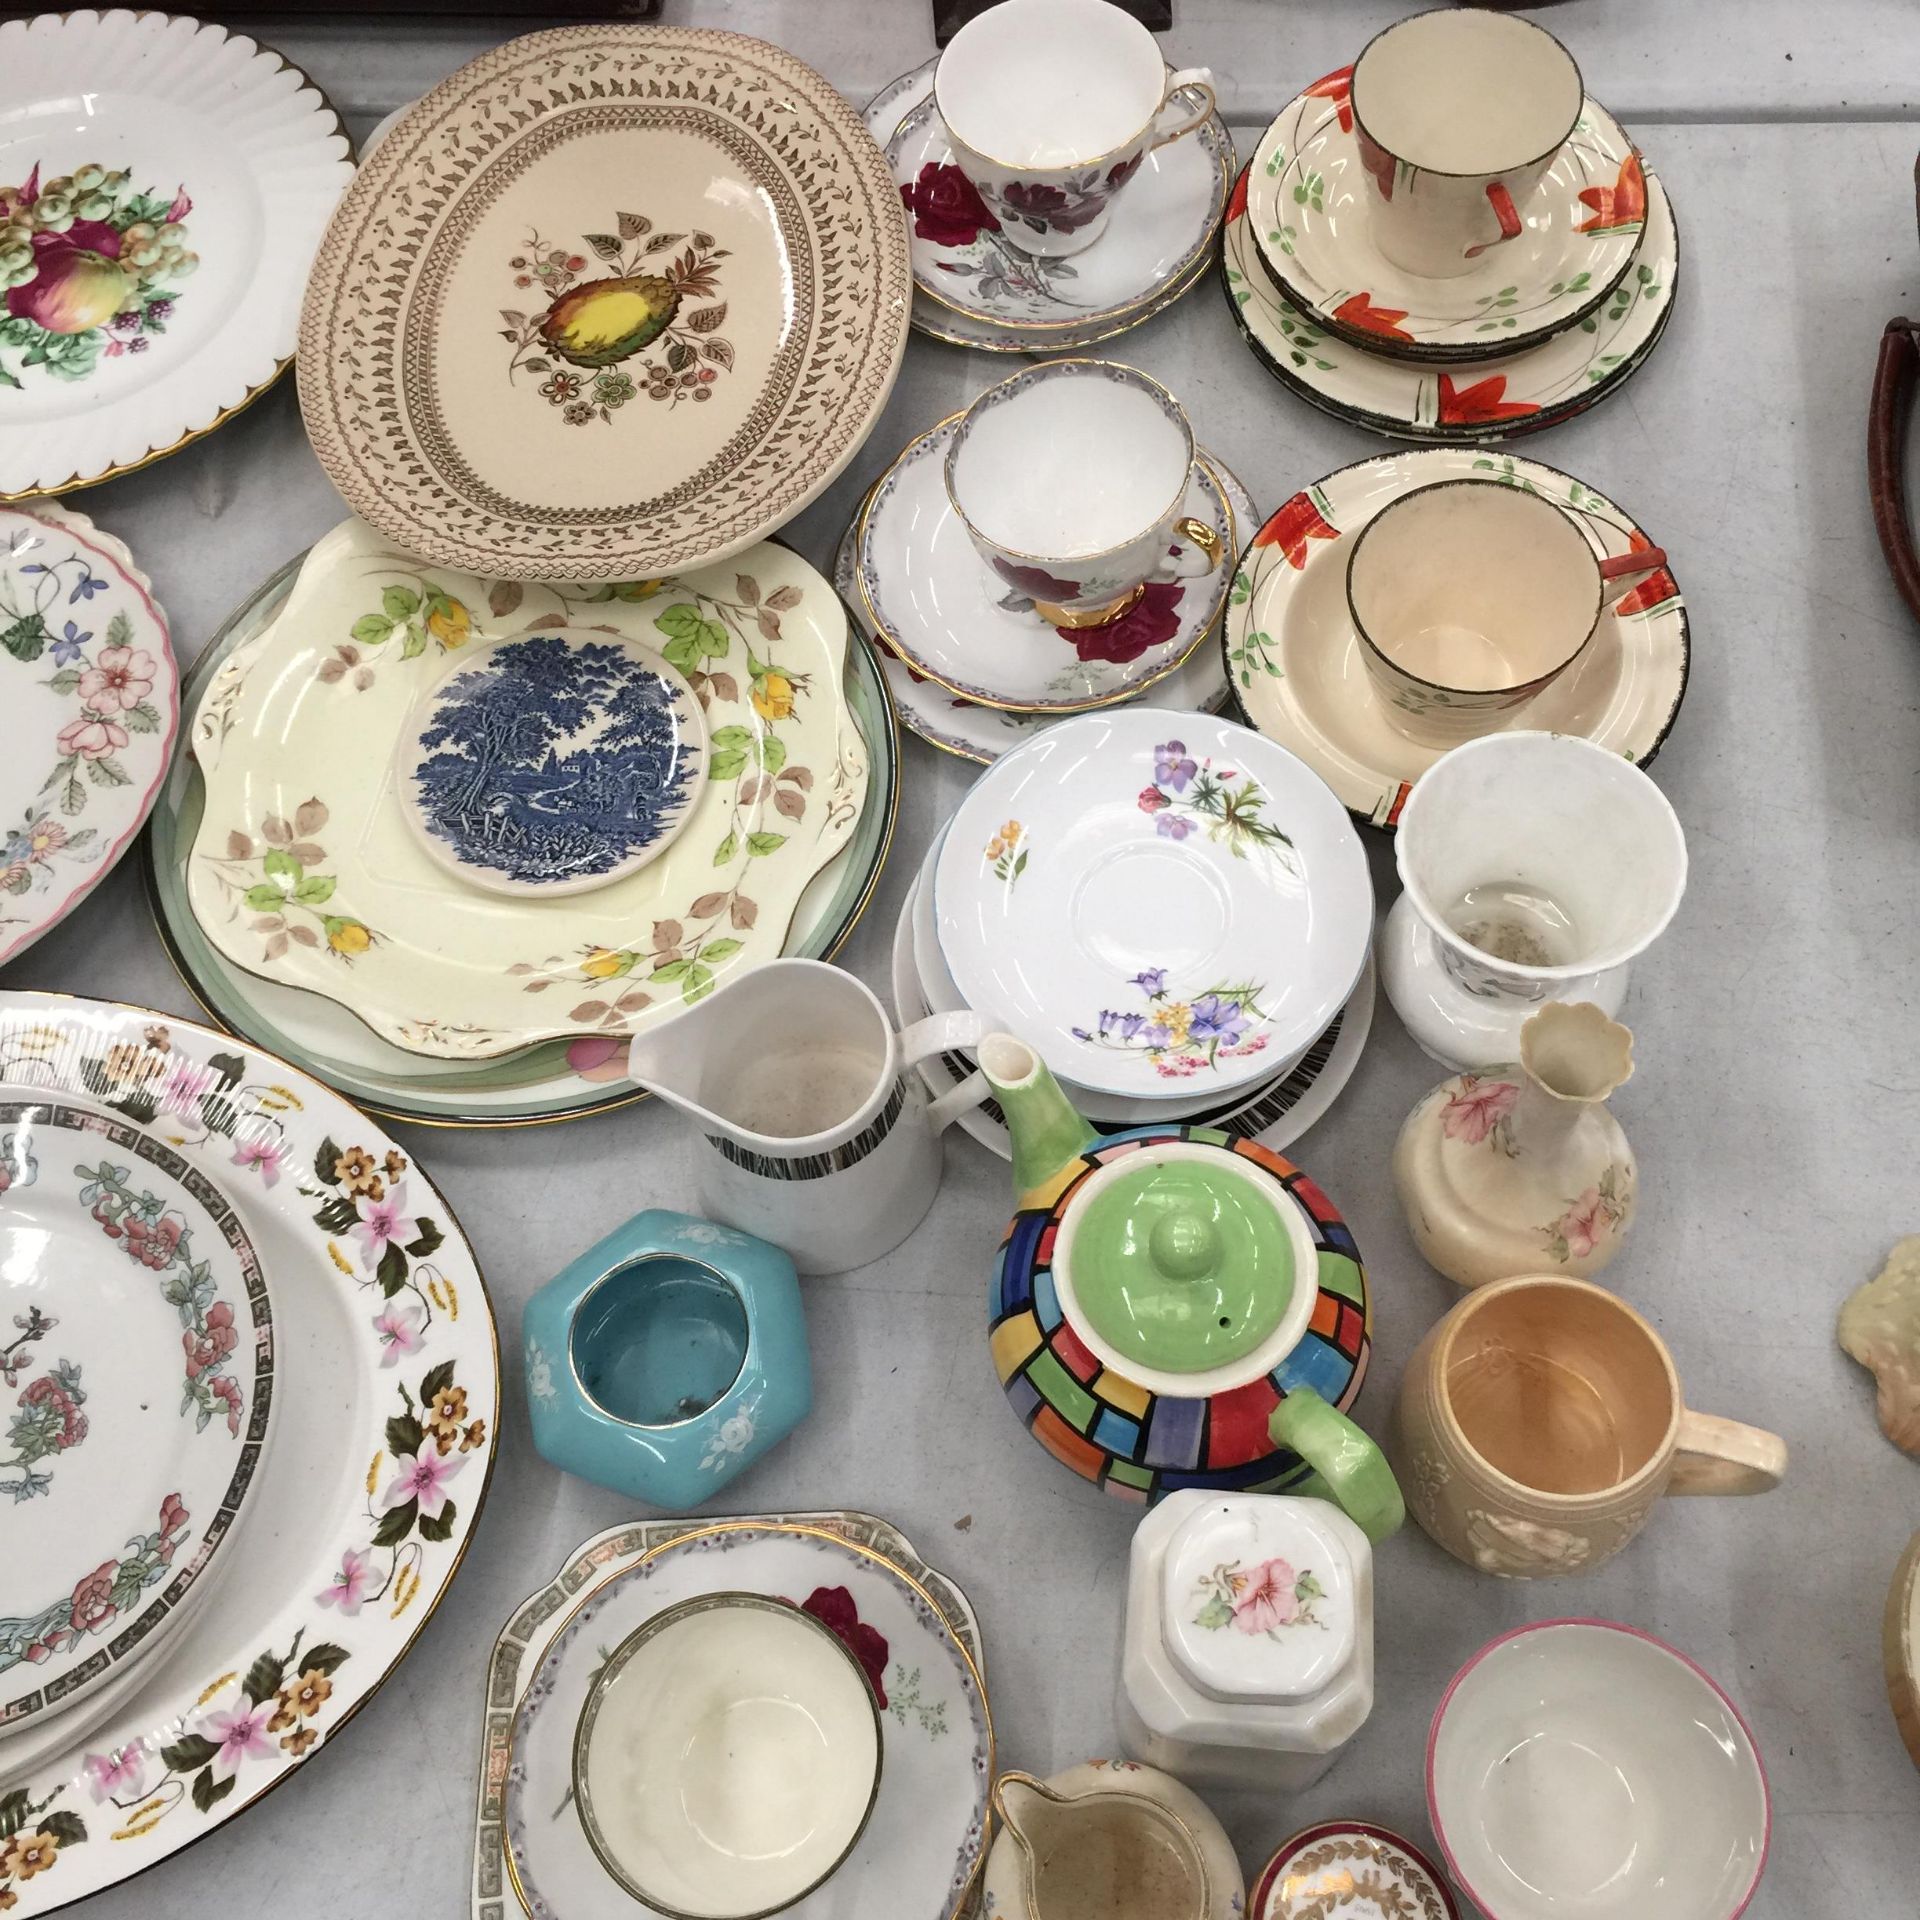 A LARGE QUANTITY OF VINTAGE PLATES, CUPS, SAUCERS, ETC TO INCLUDE ROYAL STAFFORD, SHELLEY SAUCERS, - Image 3 of 3